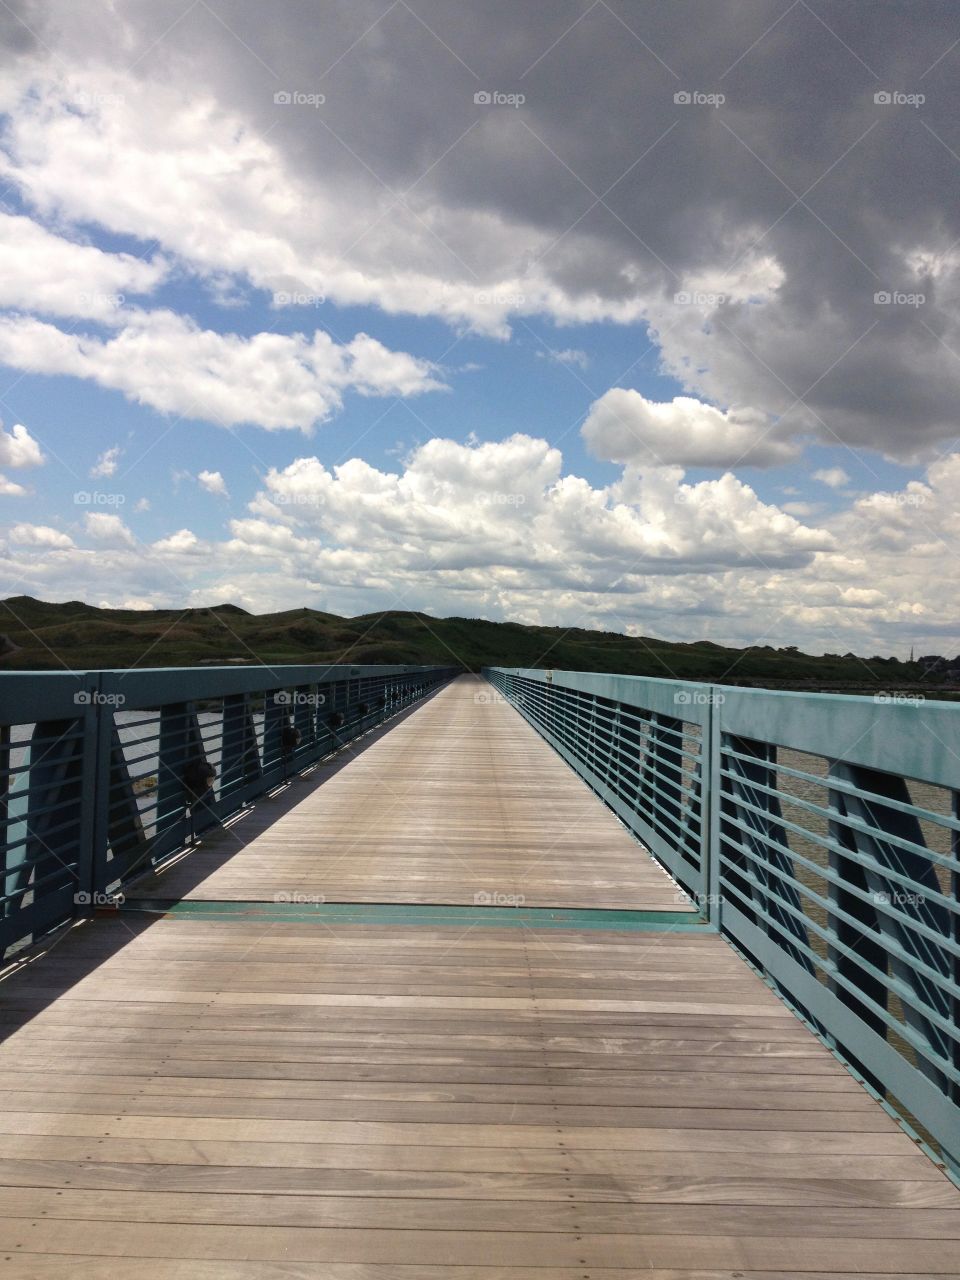 Sunny view of wooden walking bridge with metal sides towards vanishing point overhung with low clouds